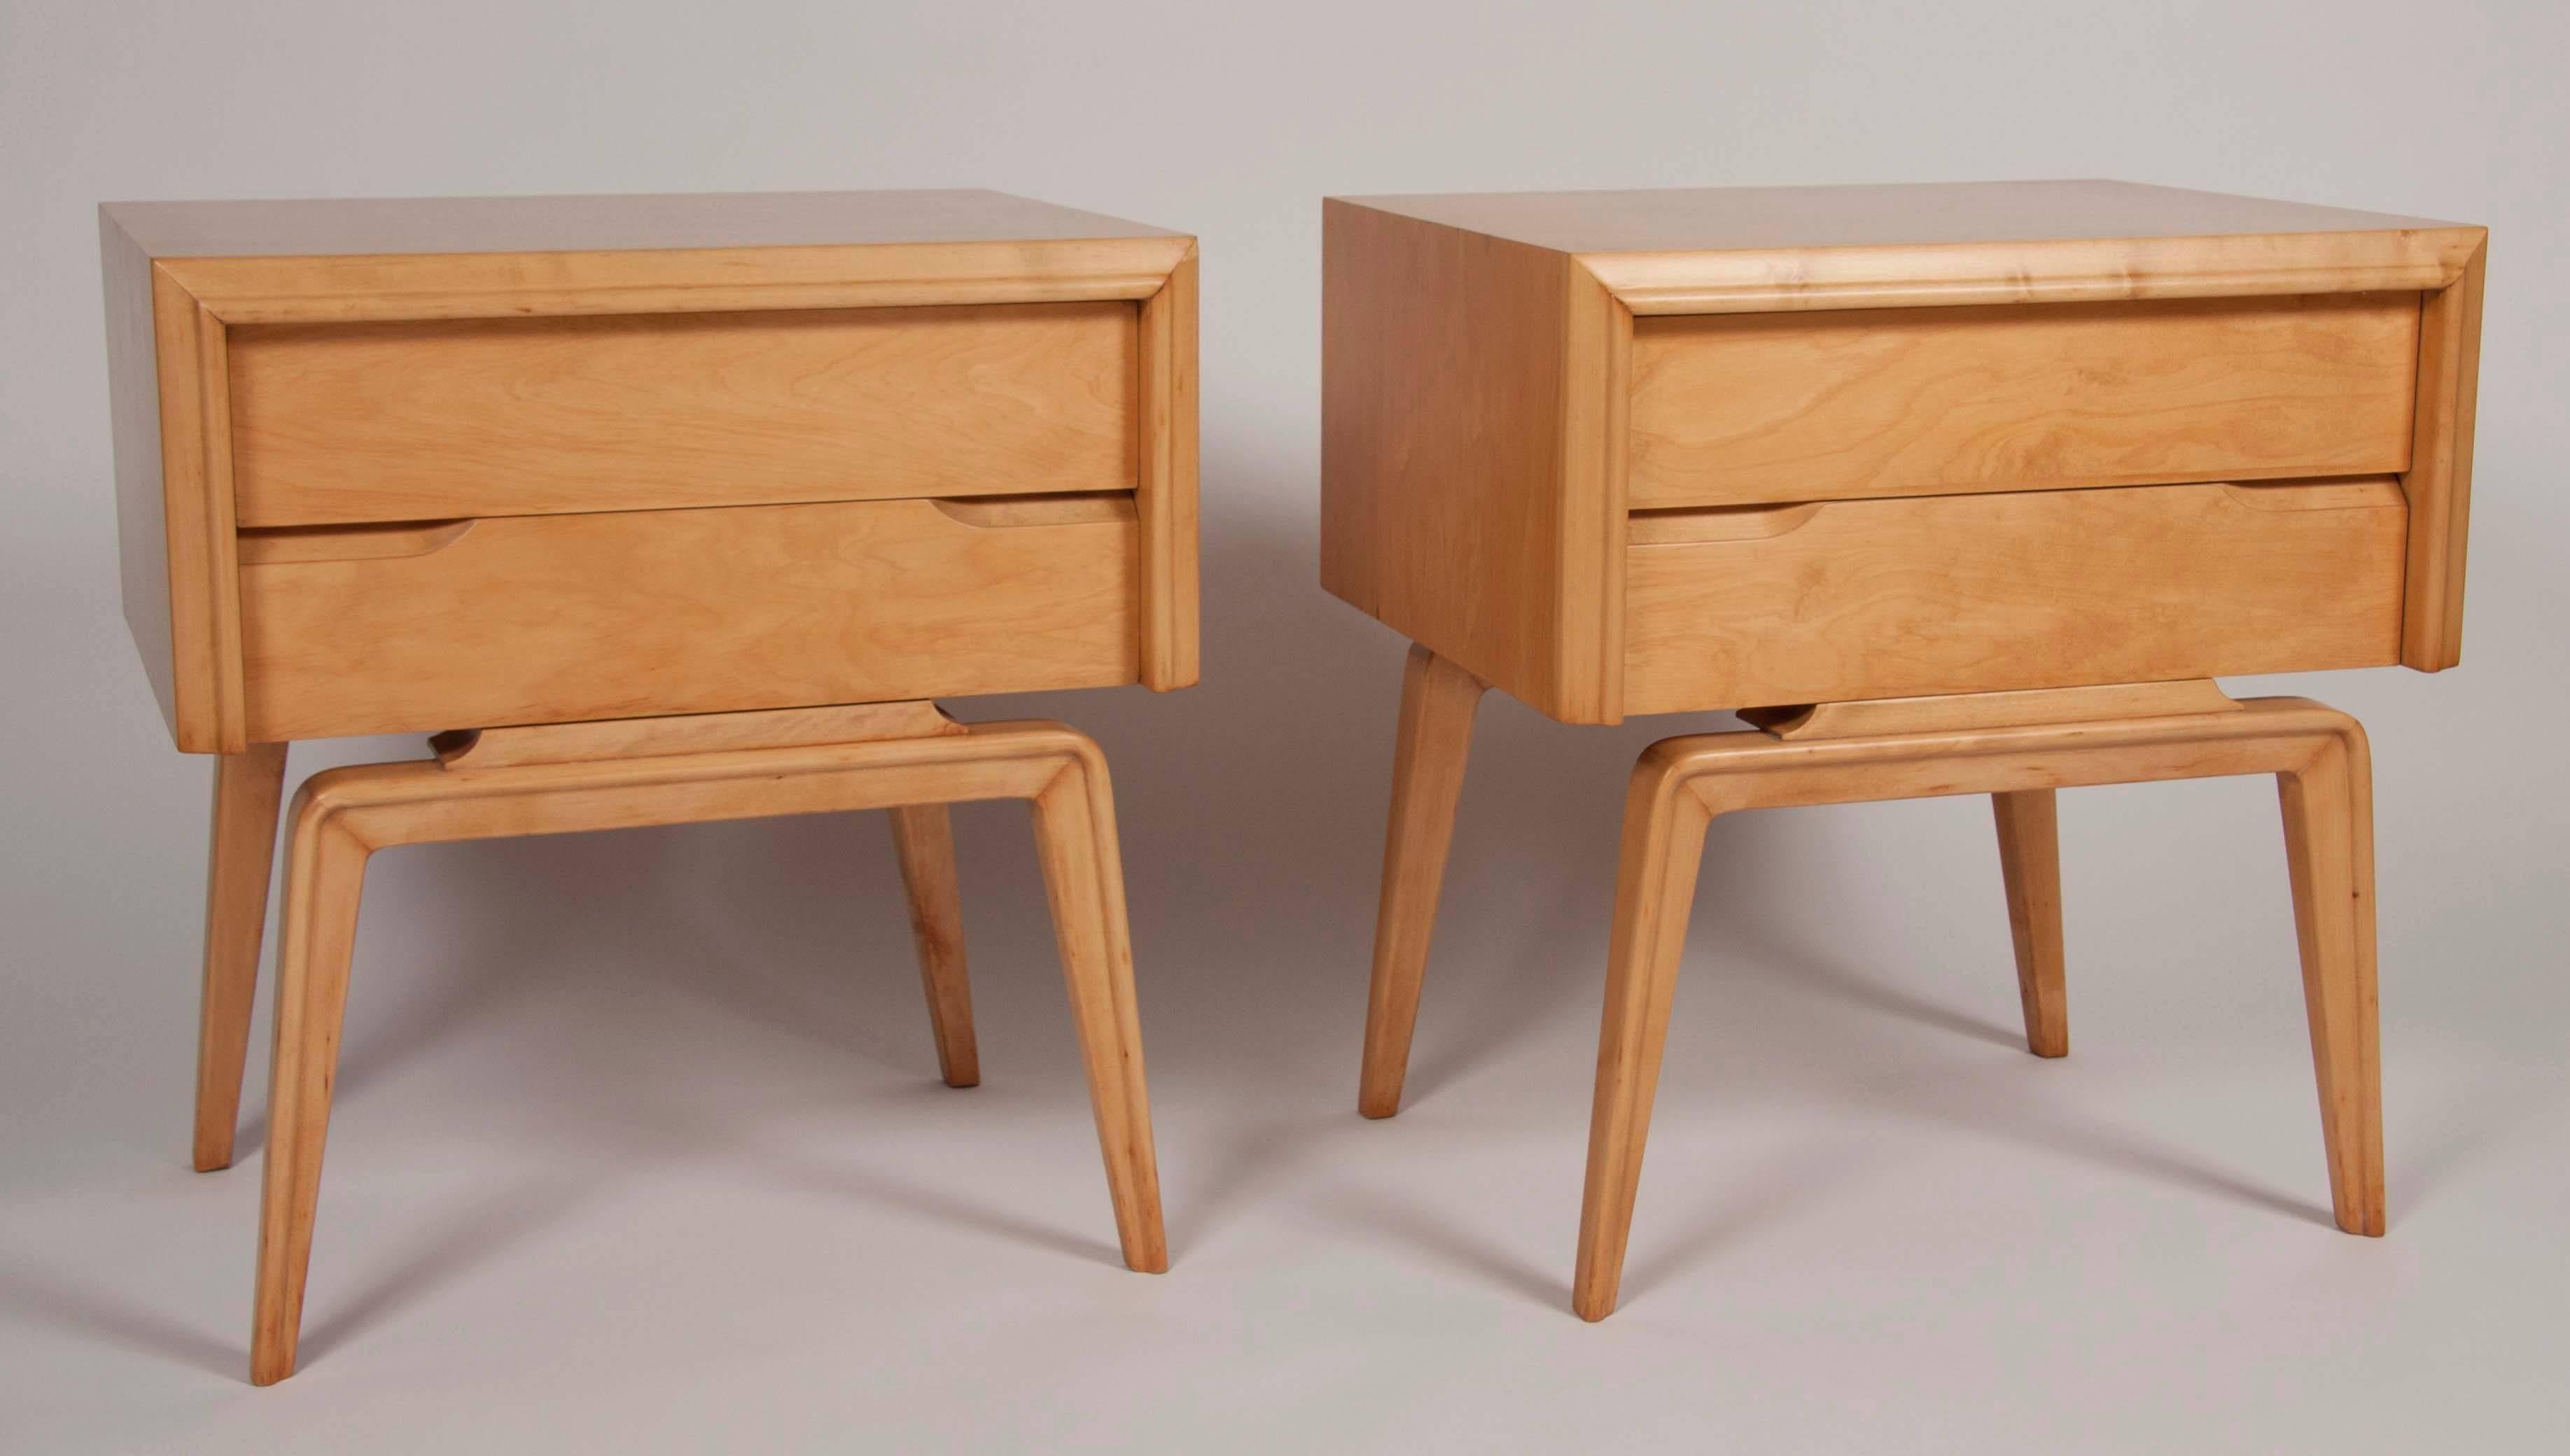 A pair of birch bedside tables by Edmond Spence. Finished on all sides.